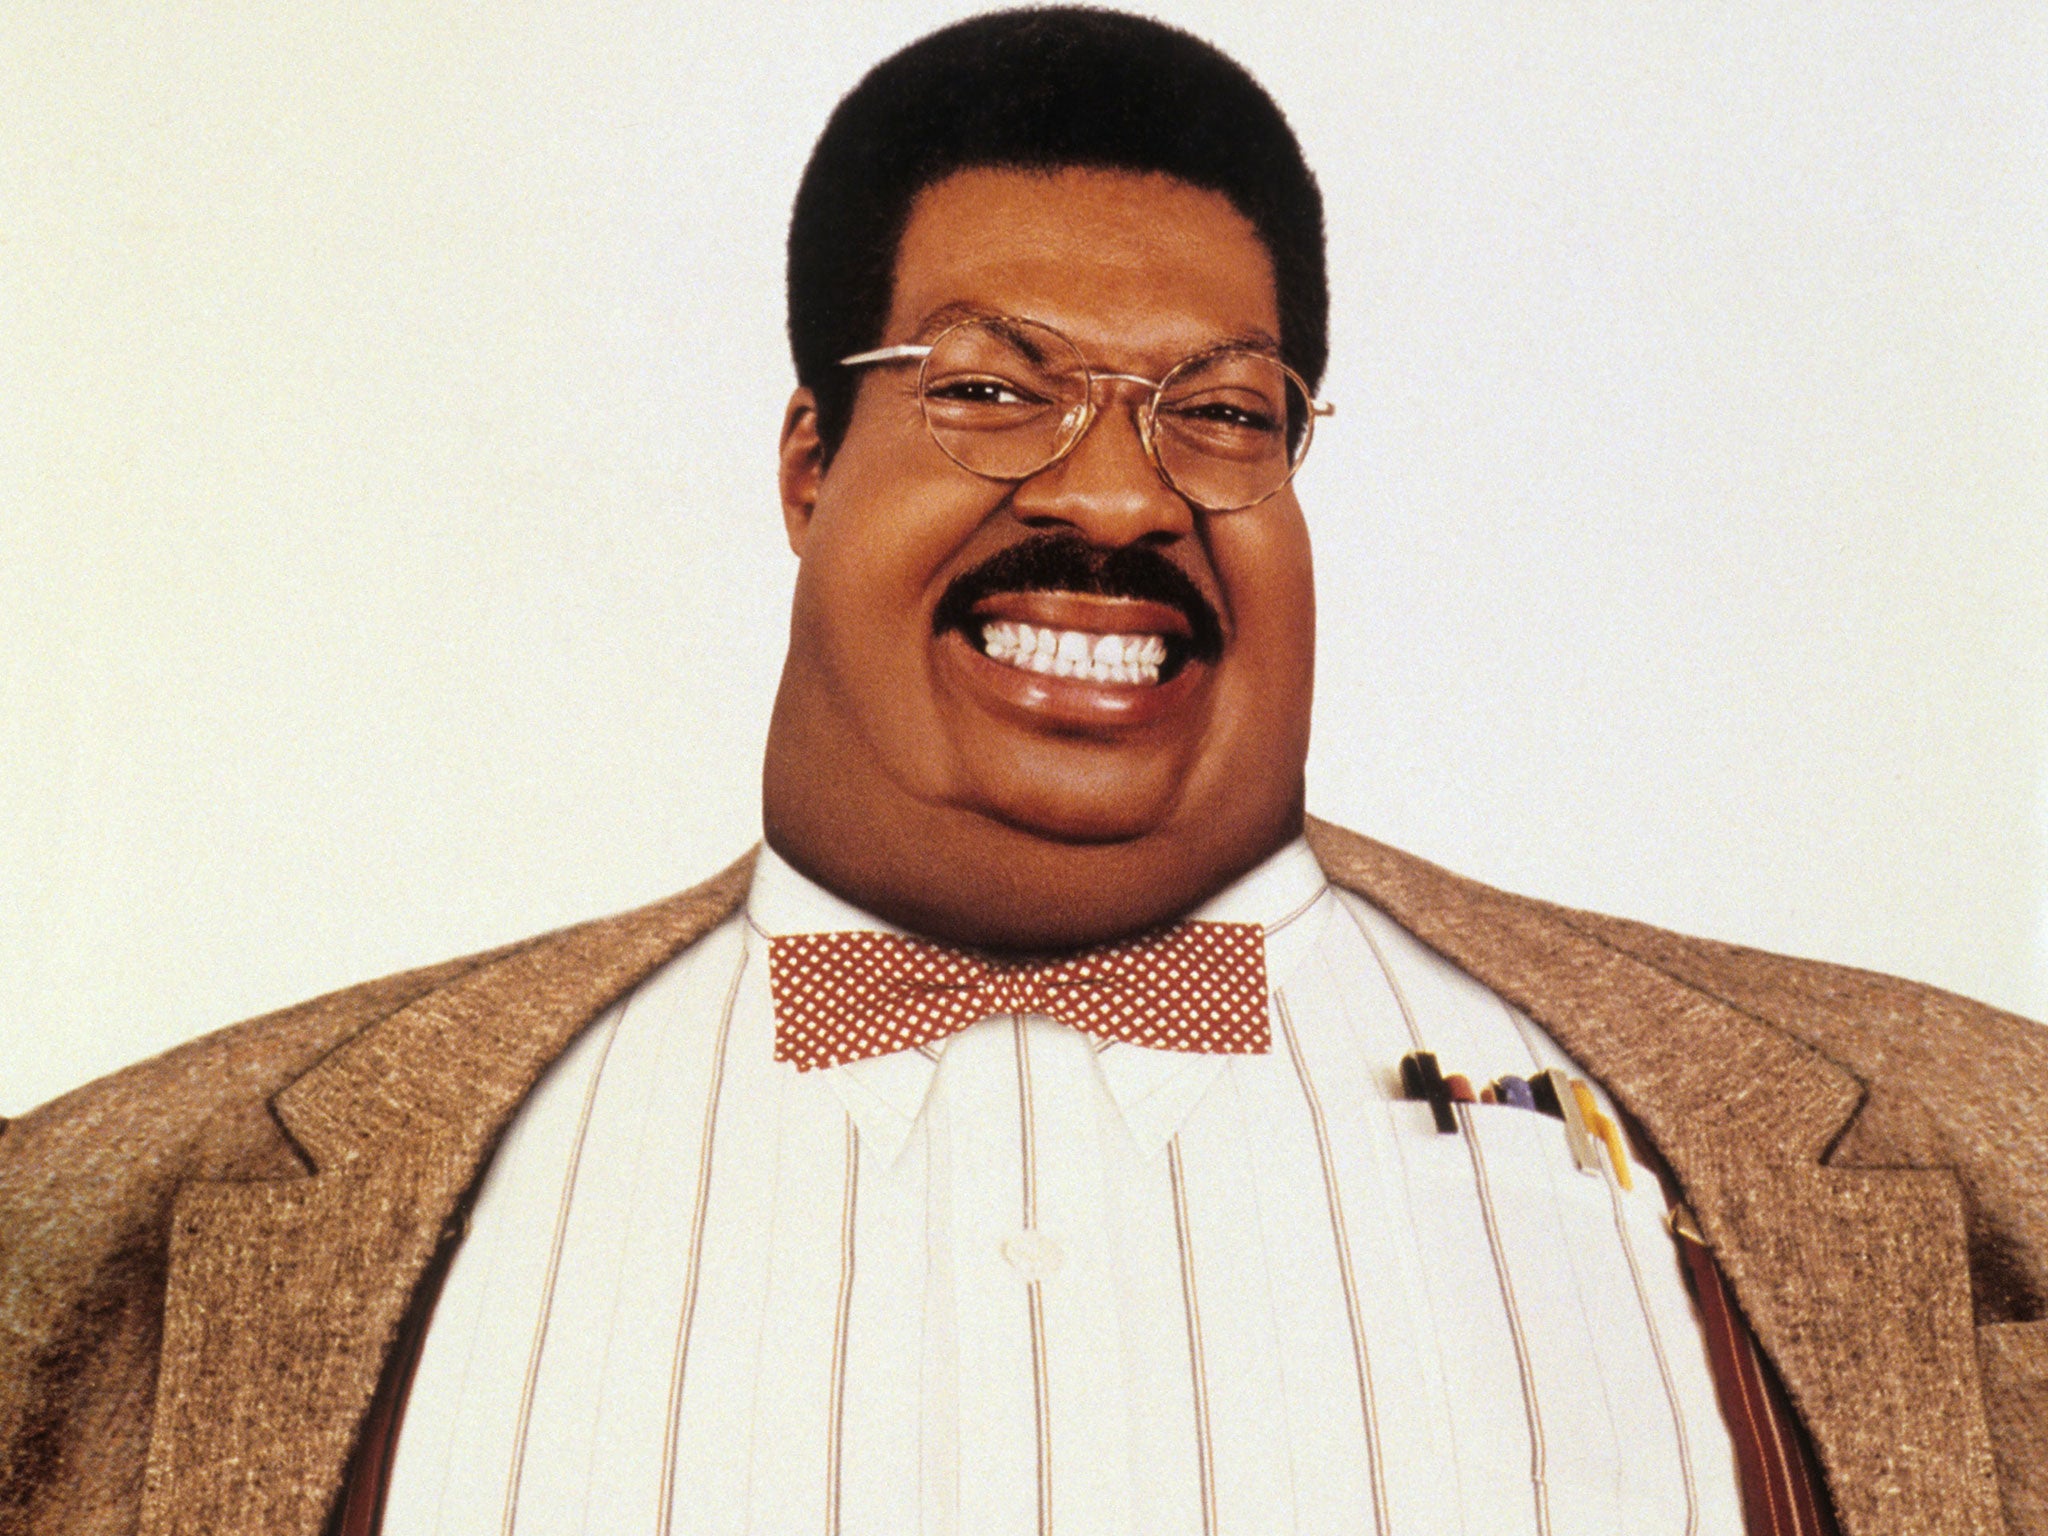 Those who took after the Nutty Professor became more outgoing after a drink (Image: Rex)